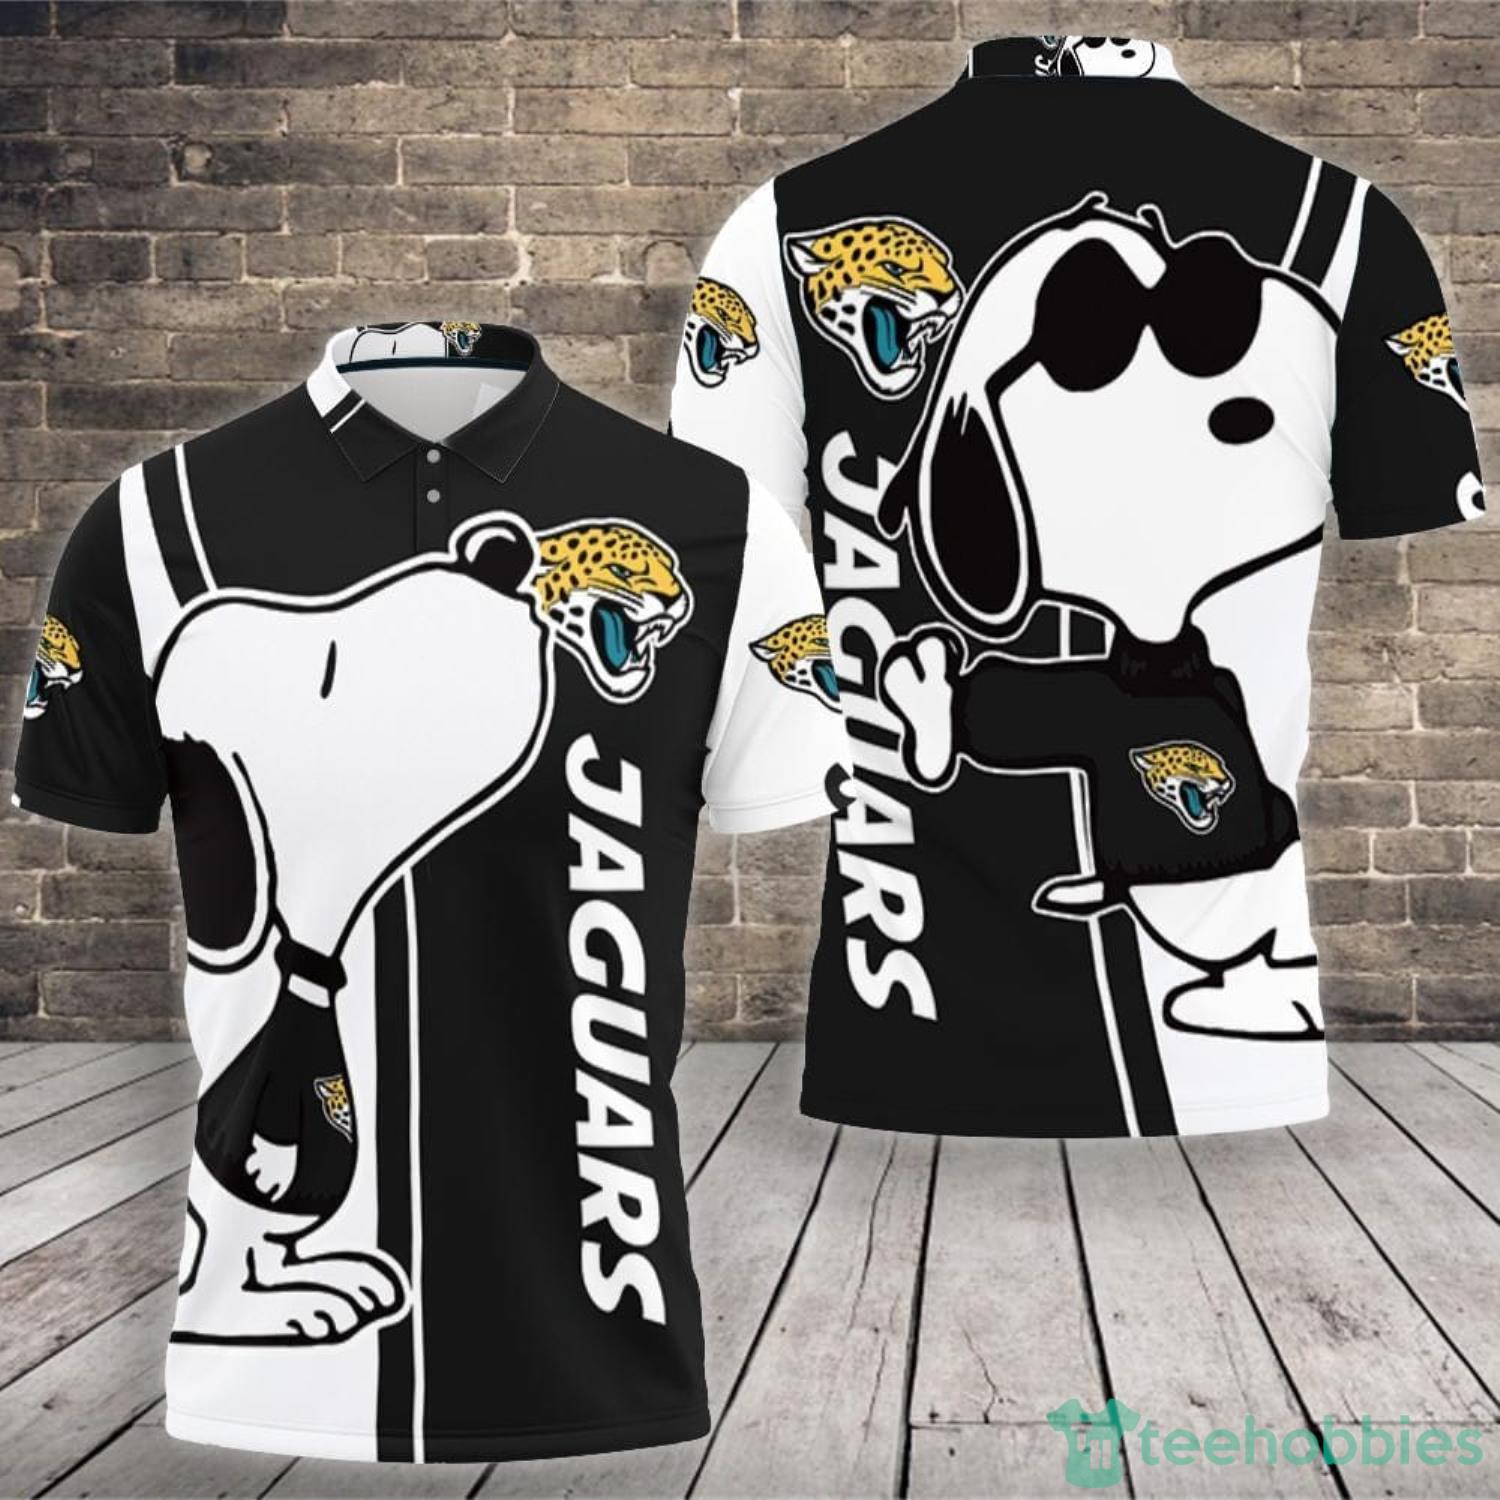 Jacksonville Jaguars Snoopy Lover Polo Shirt For Sport Fans Product Photo 1